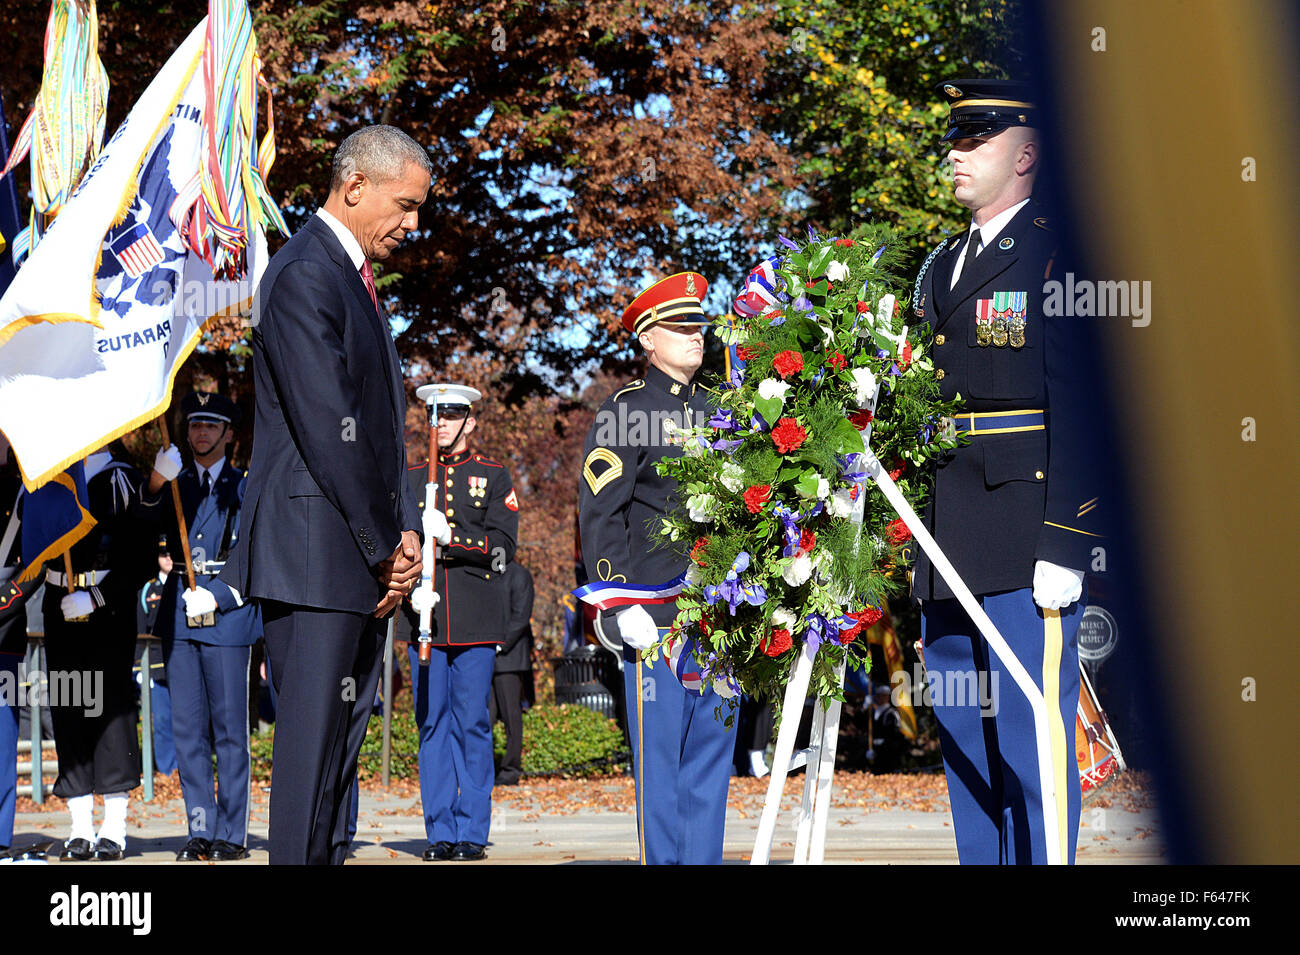 Arlington National Cemetery, USA. 11th November, 2015. U.S. President Barack Obama bows after placing a wreath in honor of Veterans Day at Arlington National Cemetery November 11, 2015 in Arlington, Virginia. Stock Photo